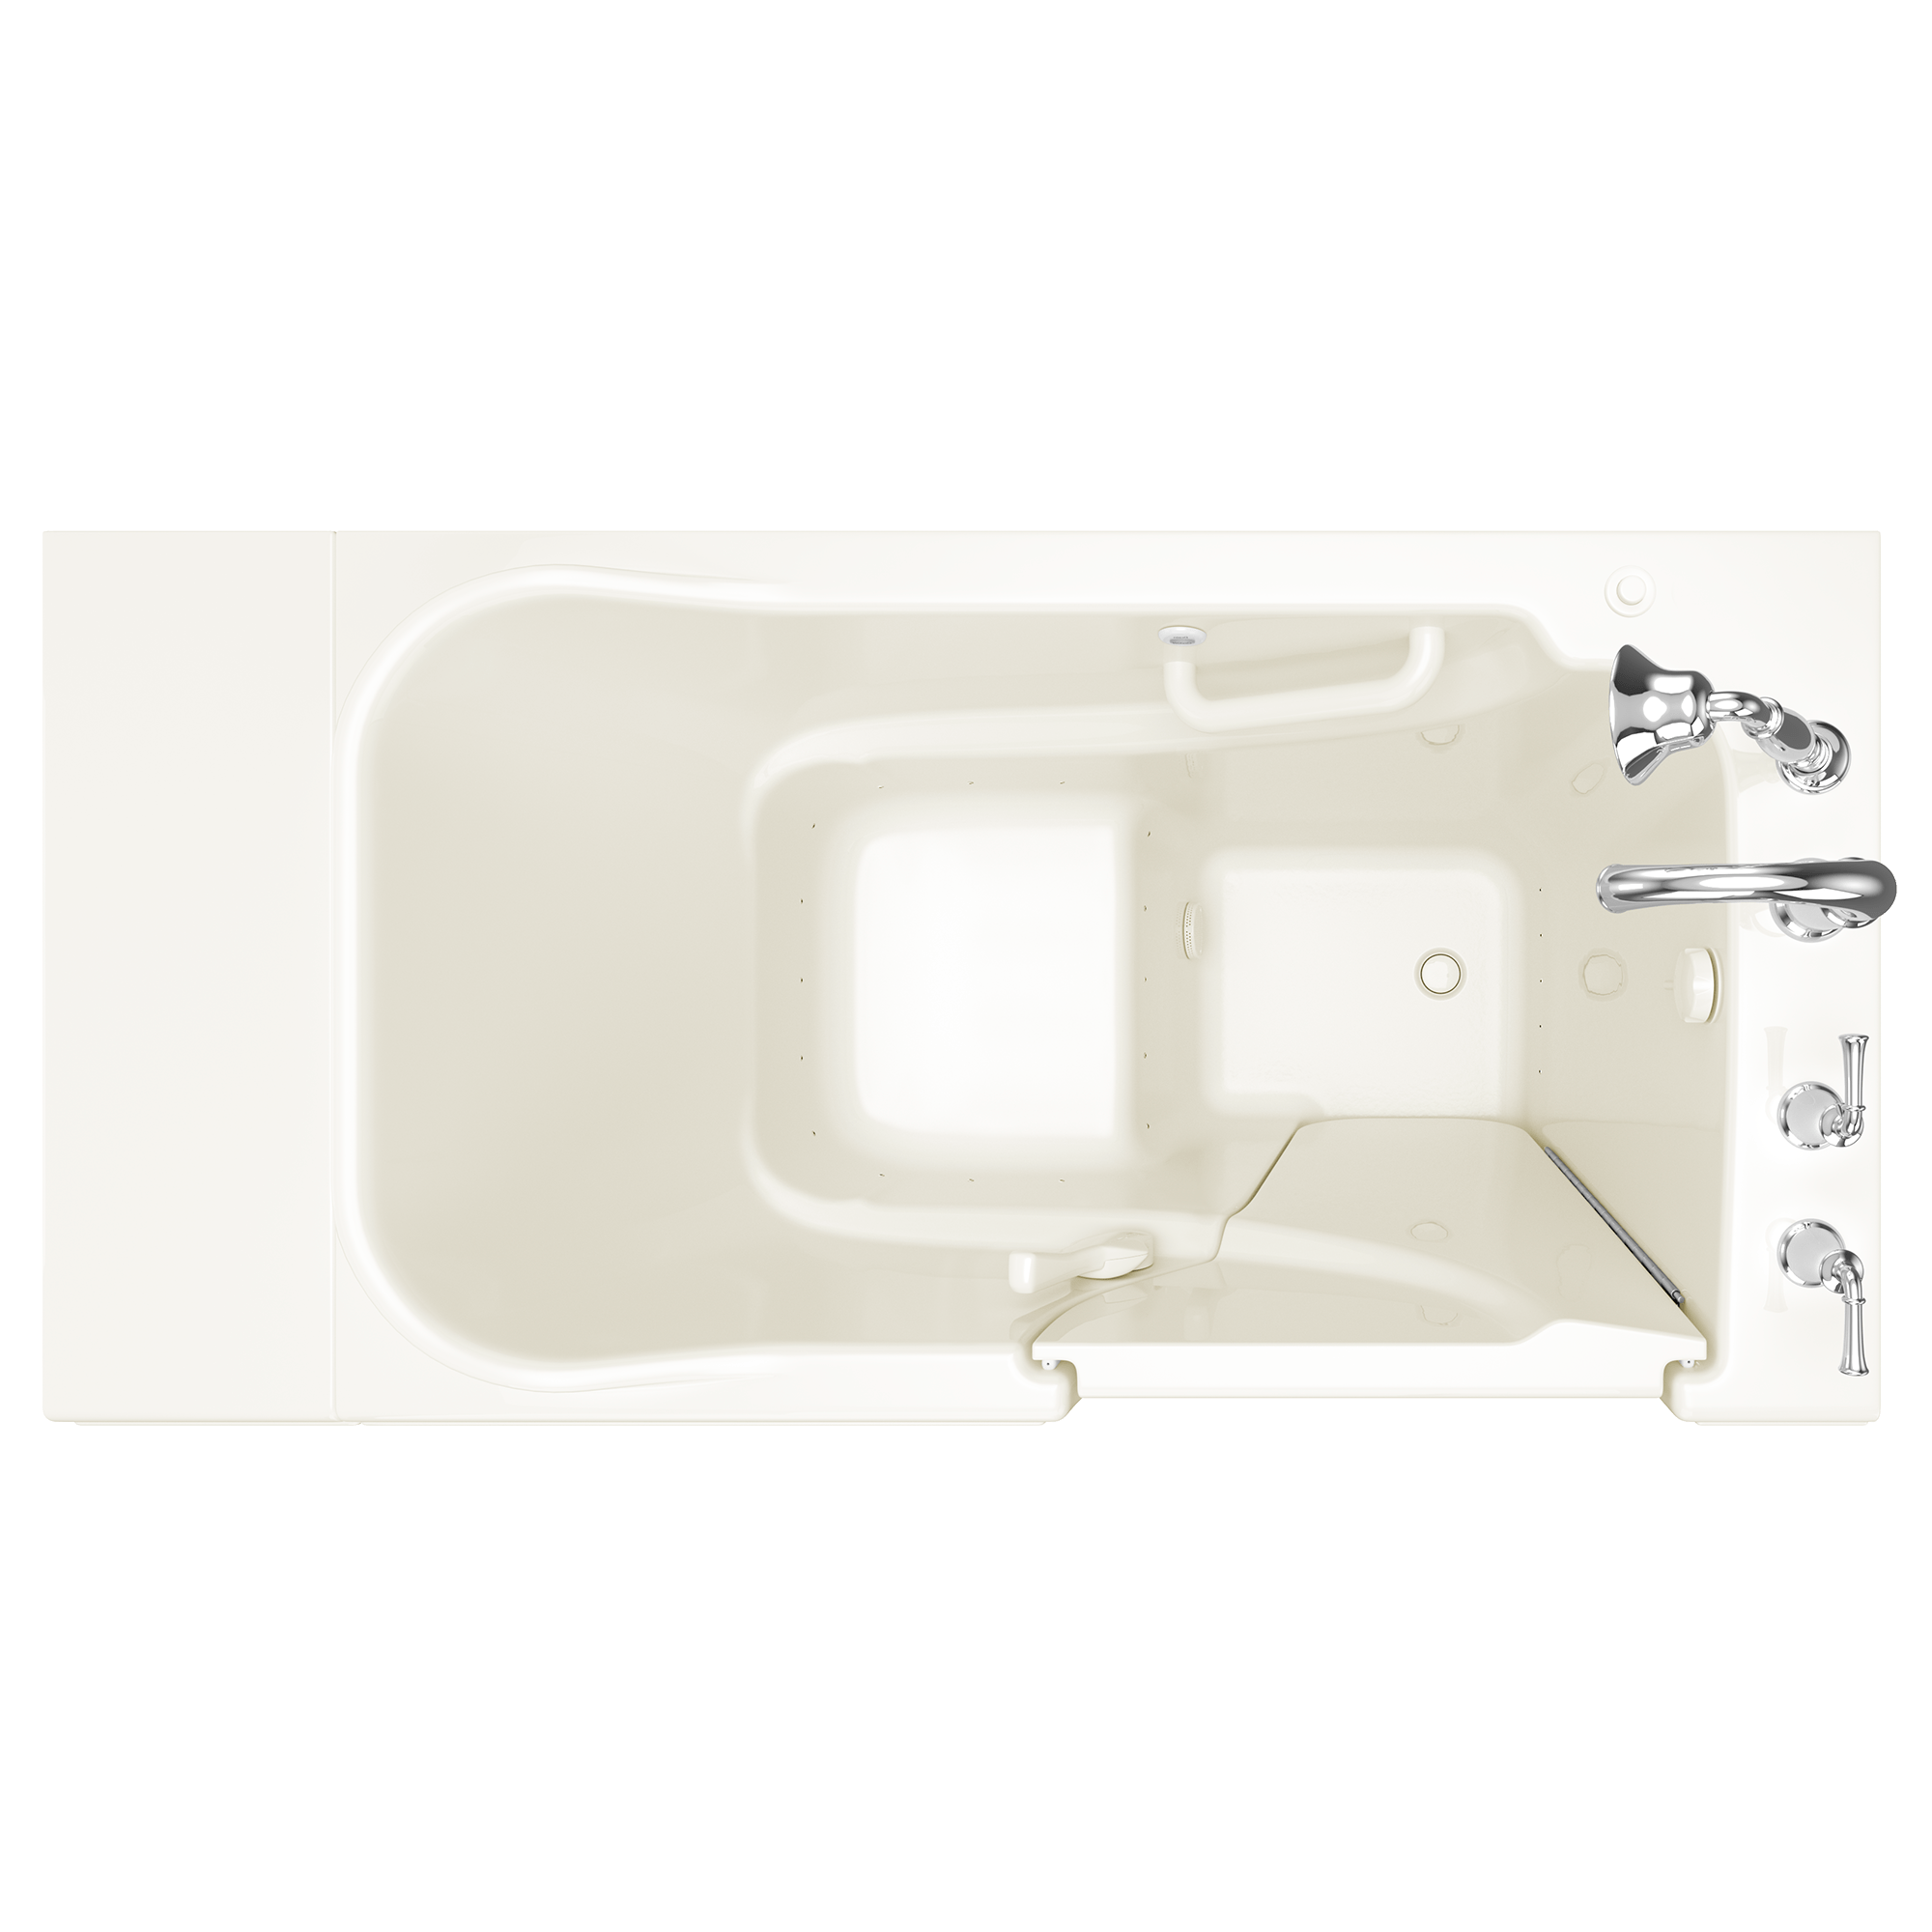 Gelcoat Value Series 30 x 52  Inch Walk in Tub With Air Spa System   Right Hand Drain With Faucet WIB LINEN